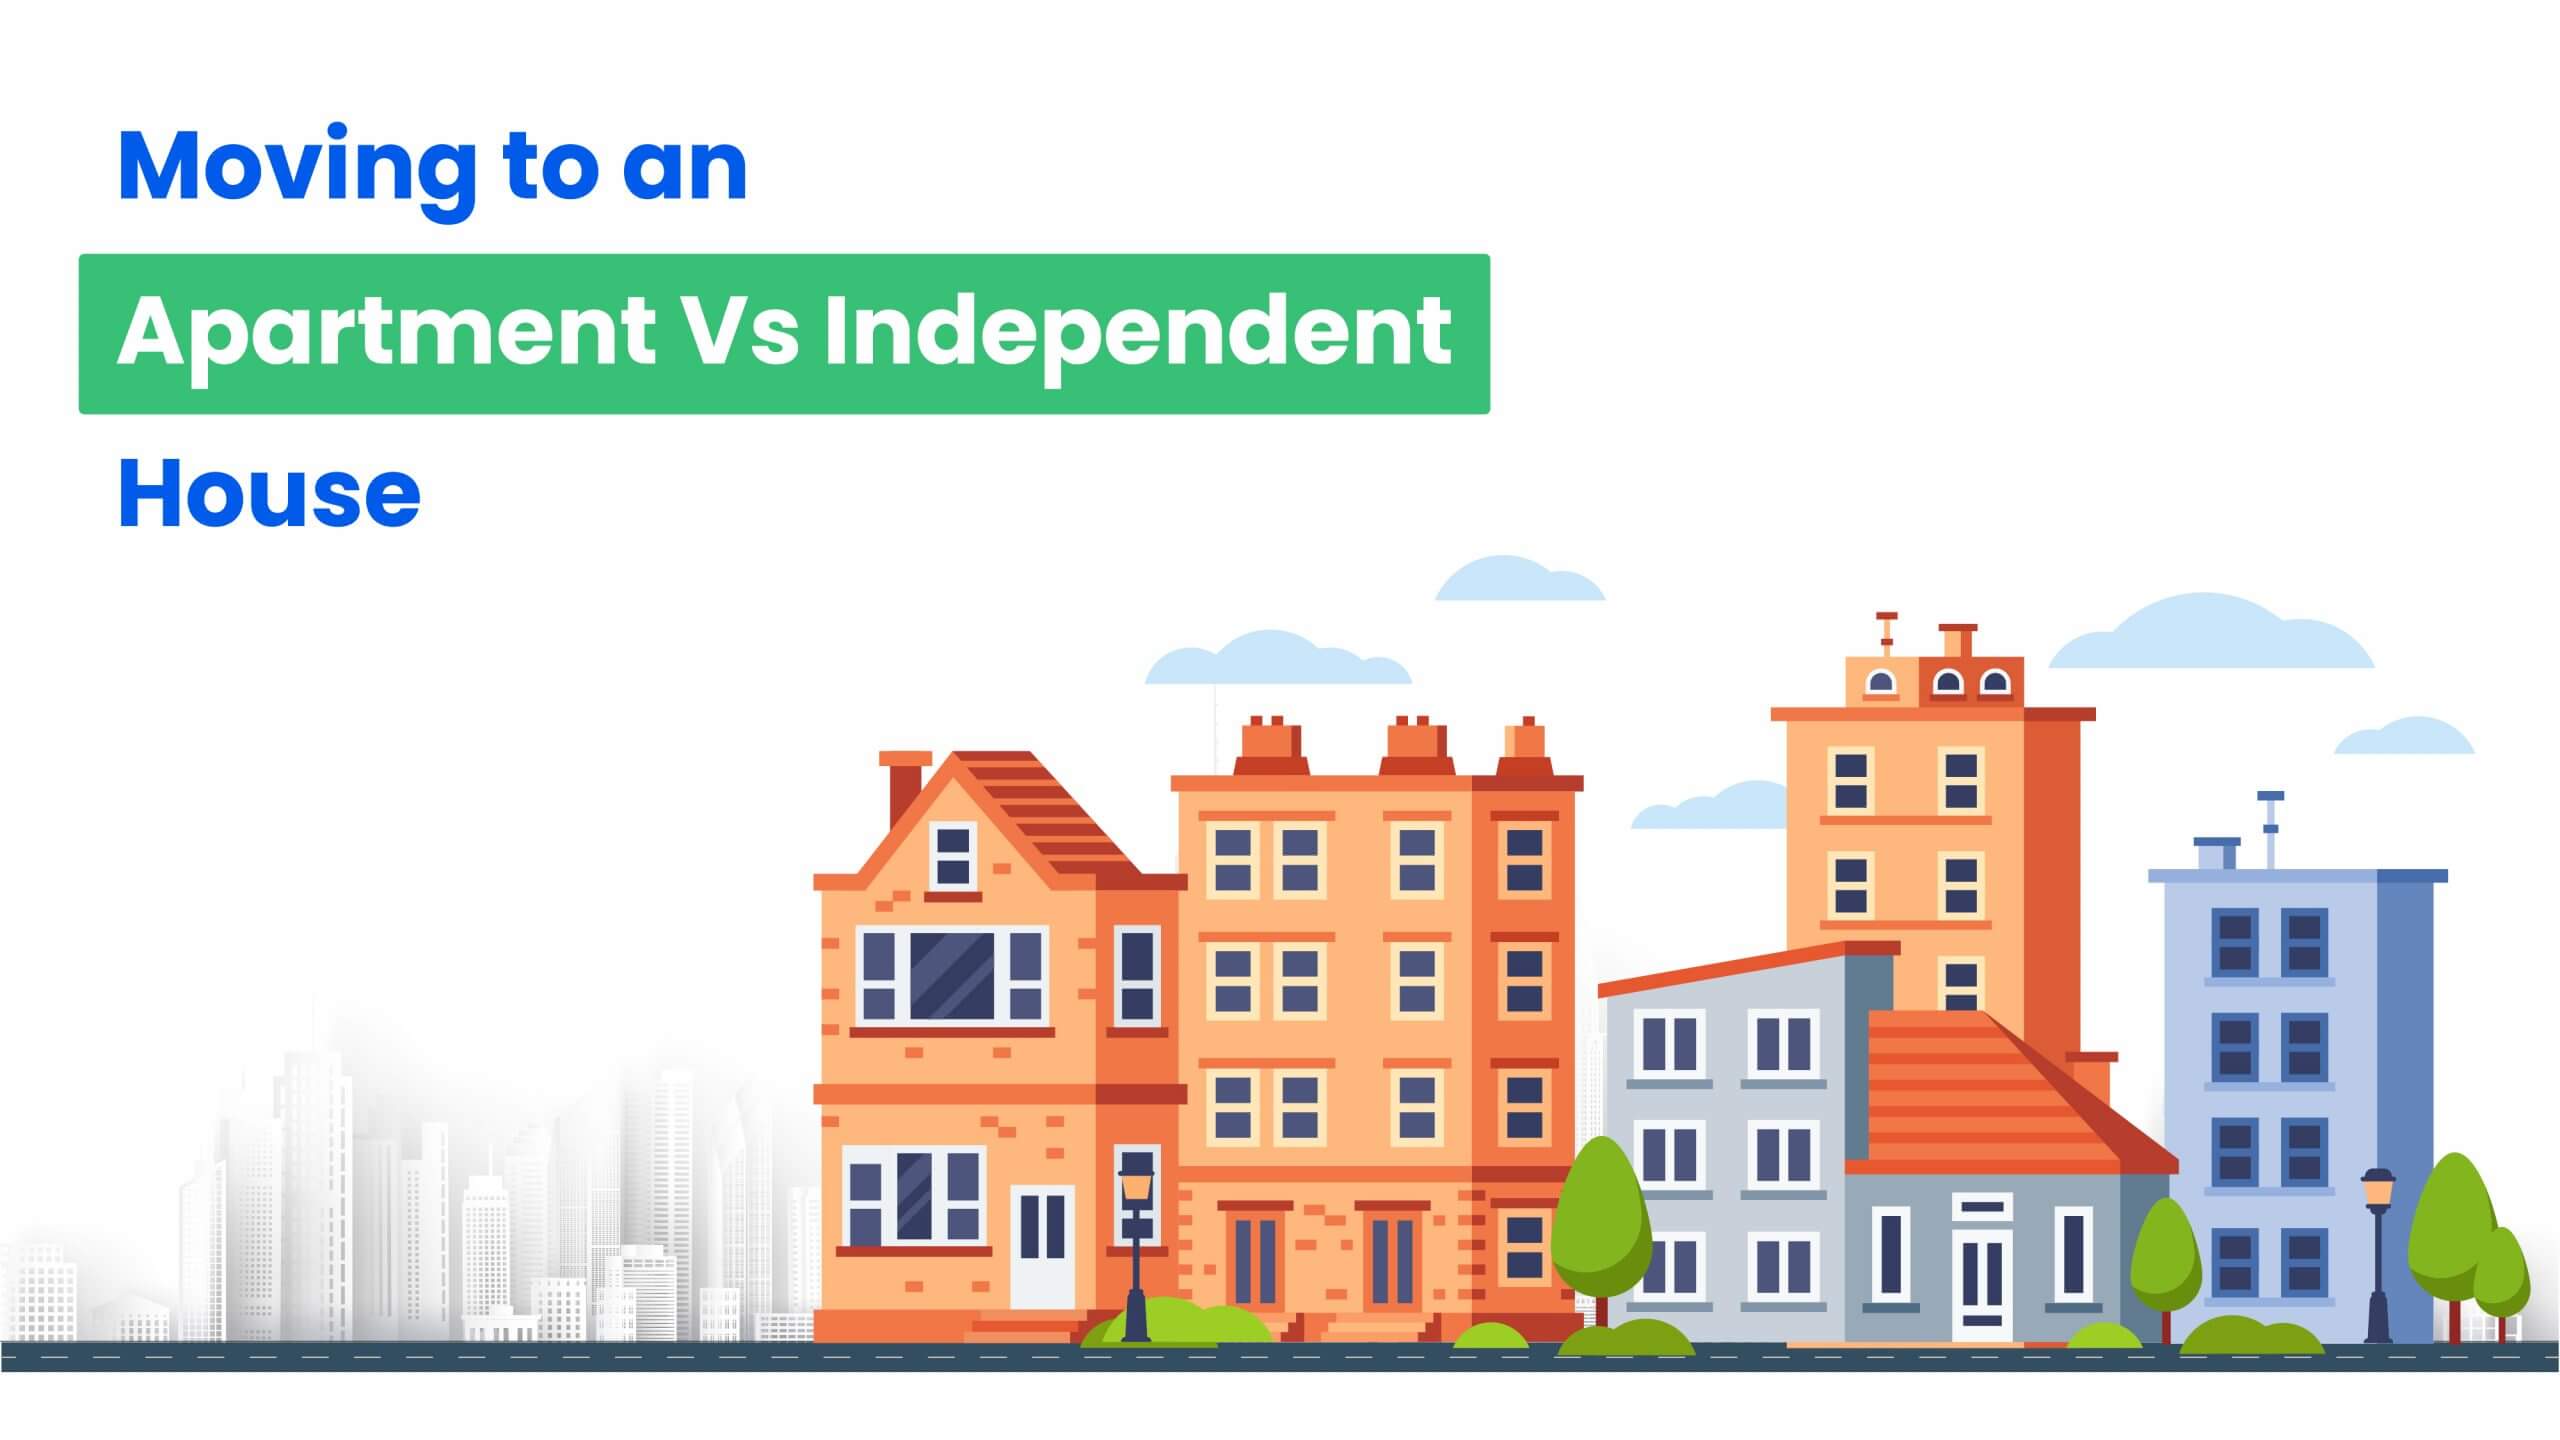 Moving to an Apartment Vs Independent House 01